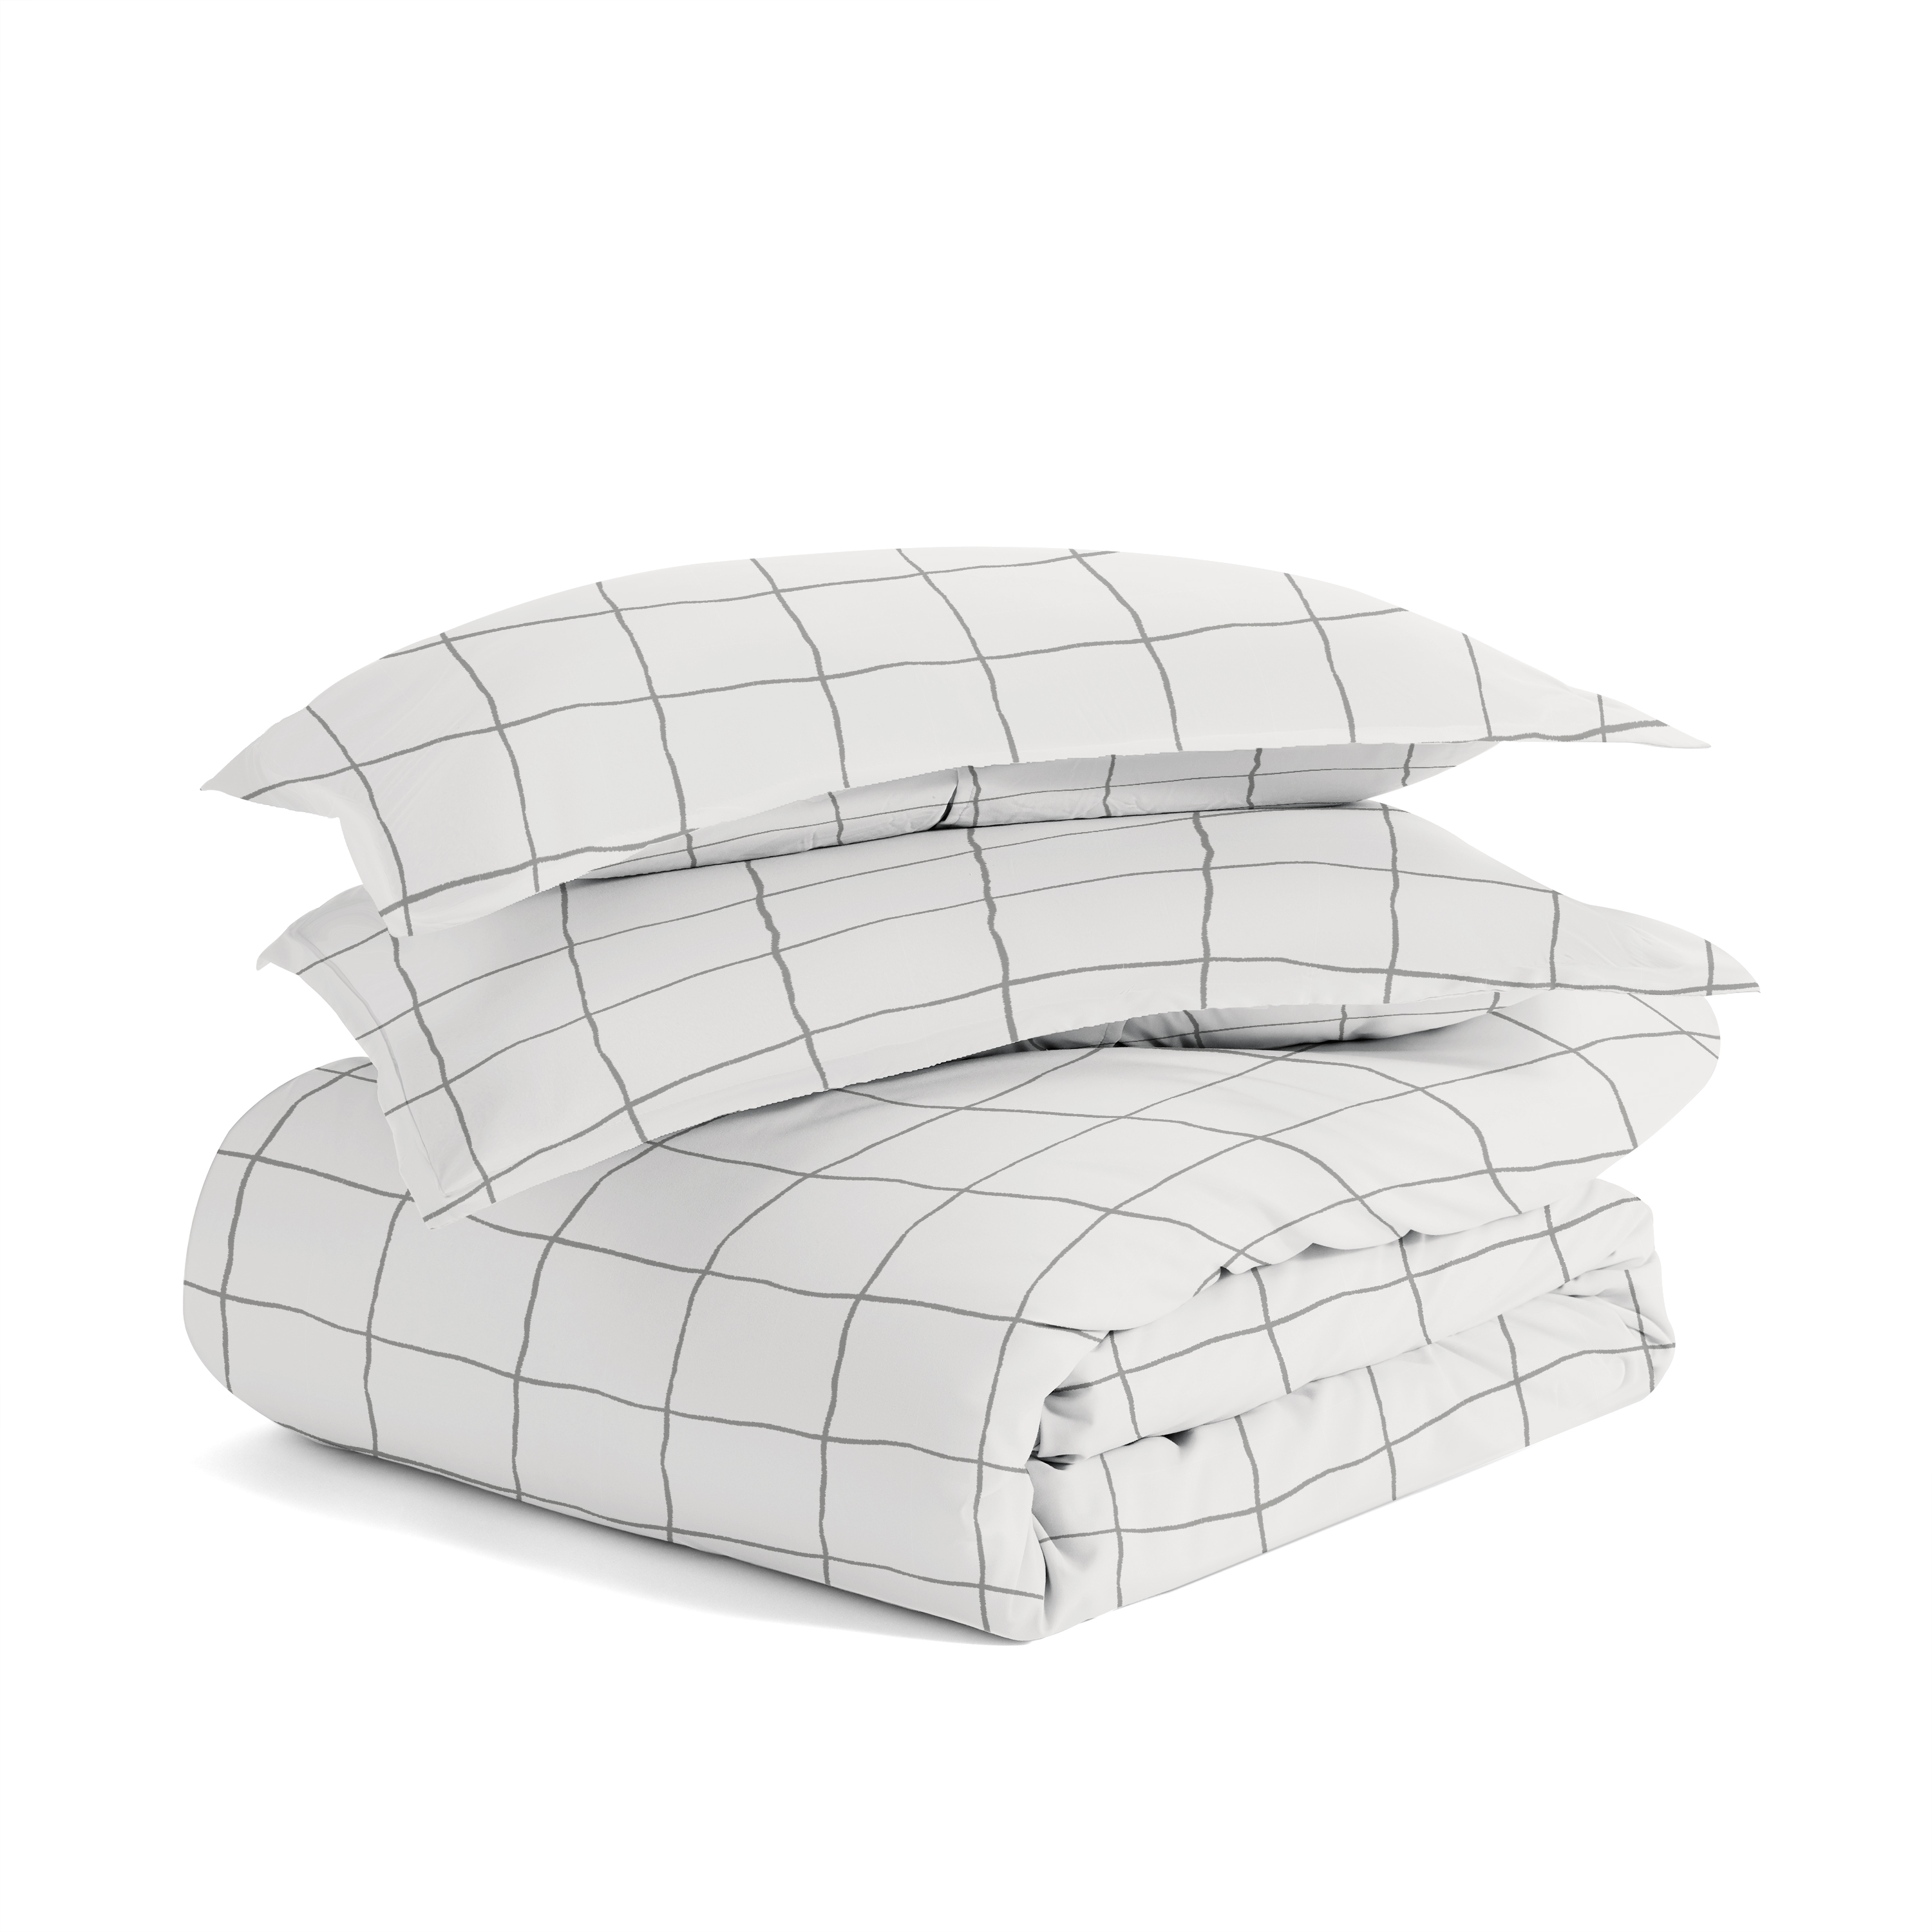 Made Supply Co. 2 Piece Hypoallergenic Oversized Grid Print Comforter Set with Shams, Twin/Twin XL - image 4 of 4